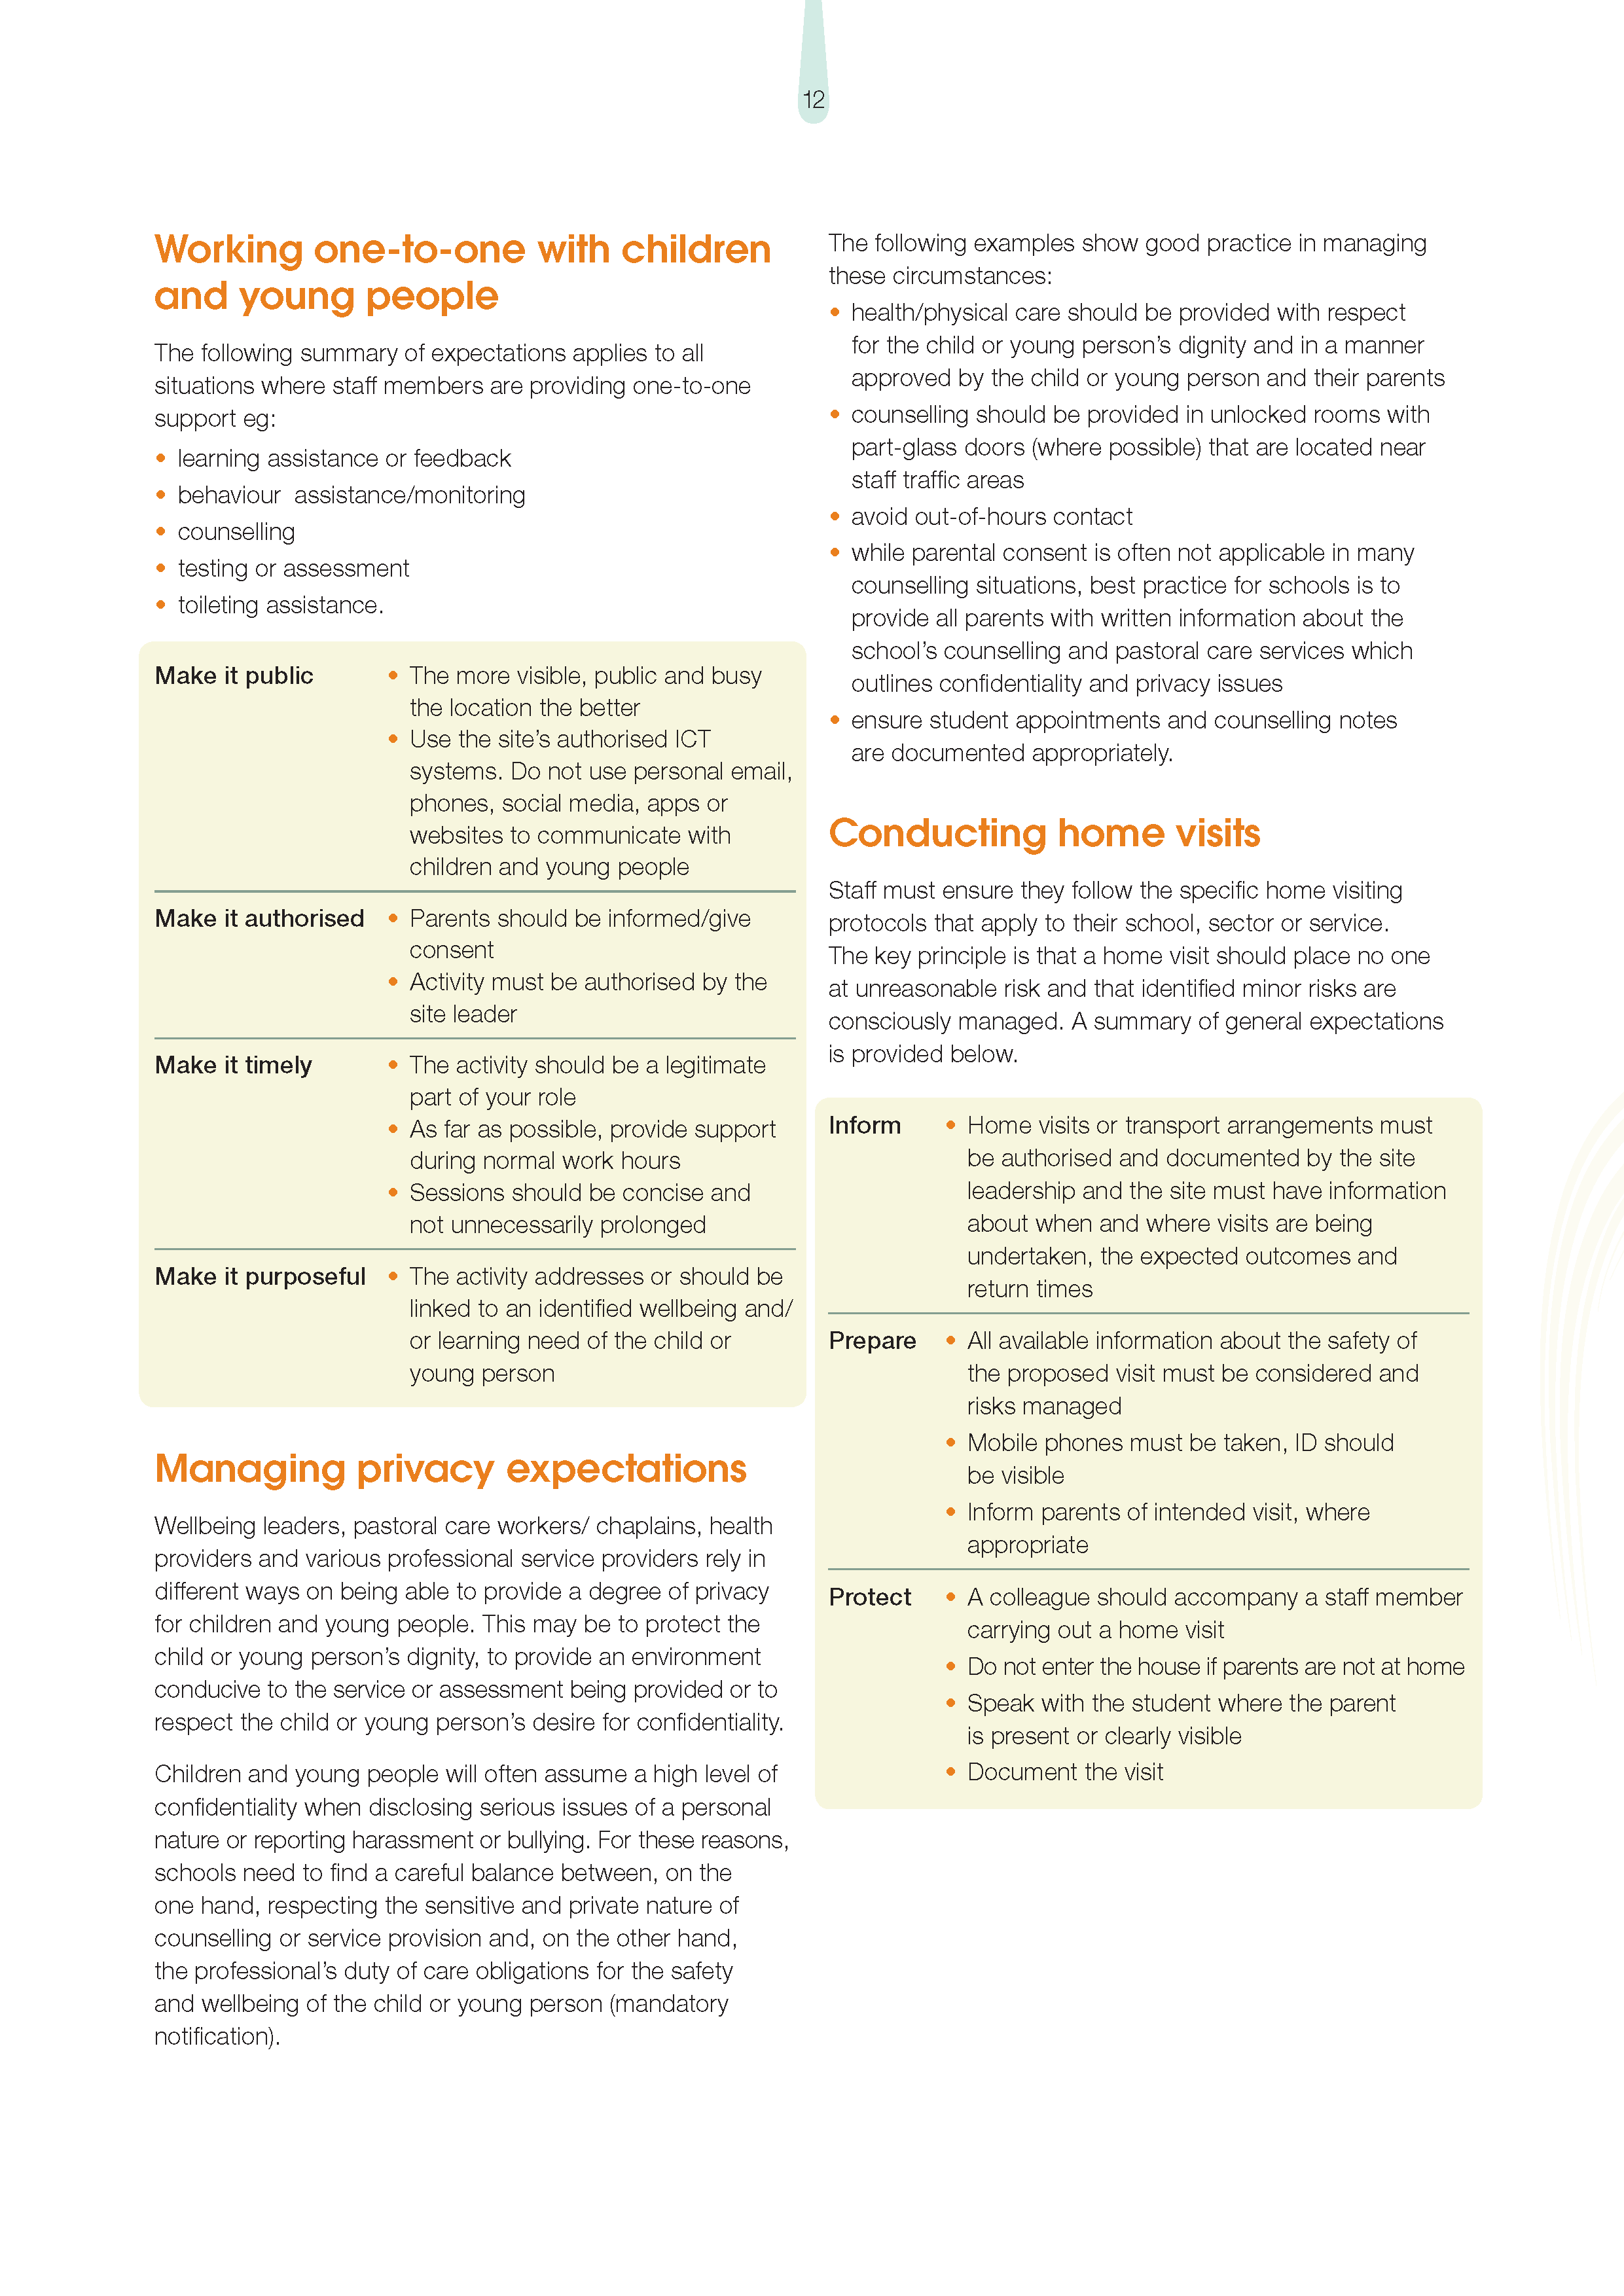 protective_practices_for_staff_in_their_interactions_with_children_and_young_people 2019_Page_15.png